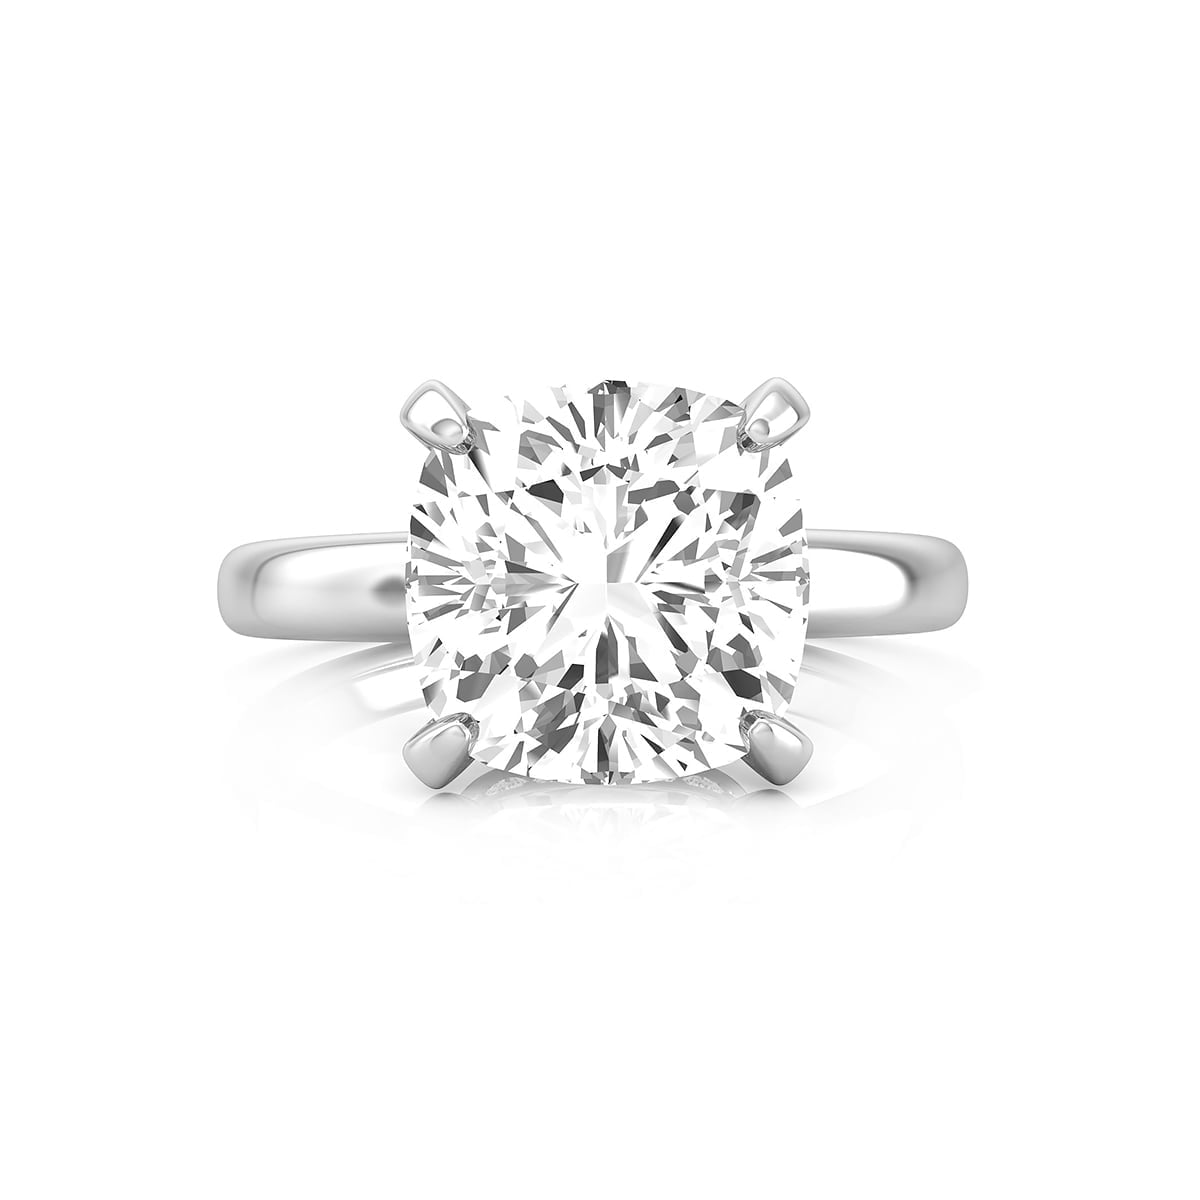 White Cushion Cut Moissanite Hidden Halo Set Solitaire Engagement Proposal Ring (4 1/4 TCW )